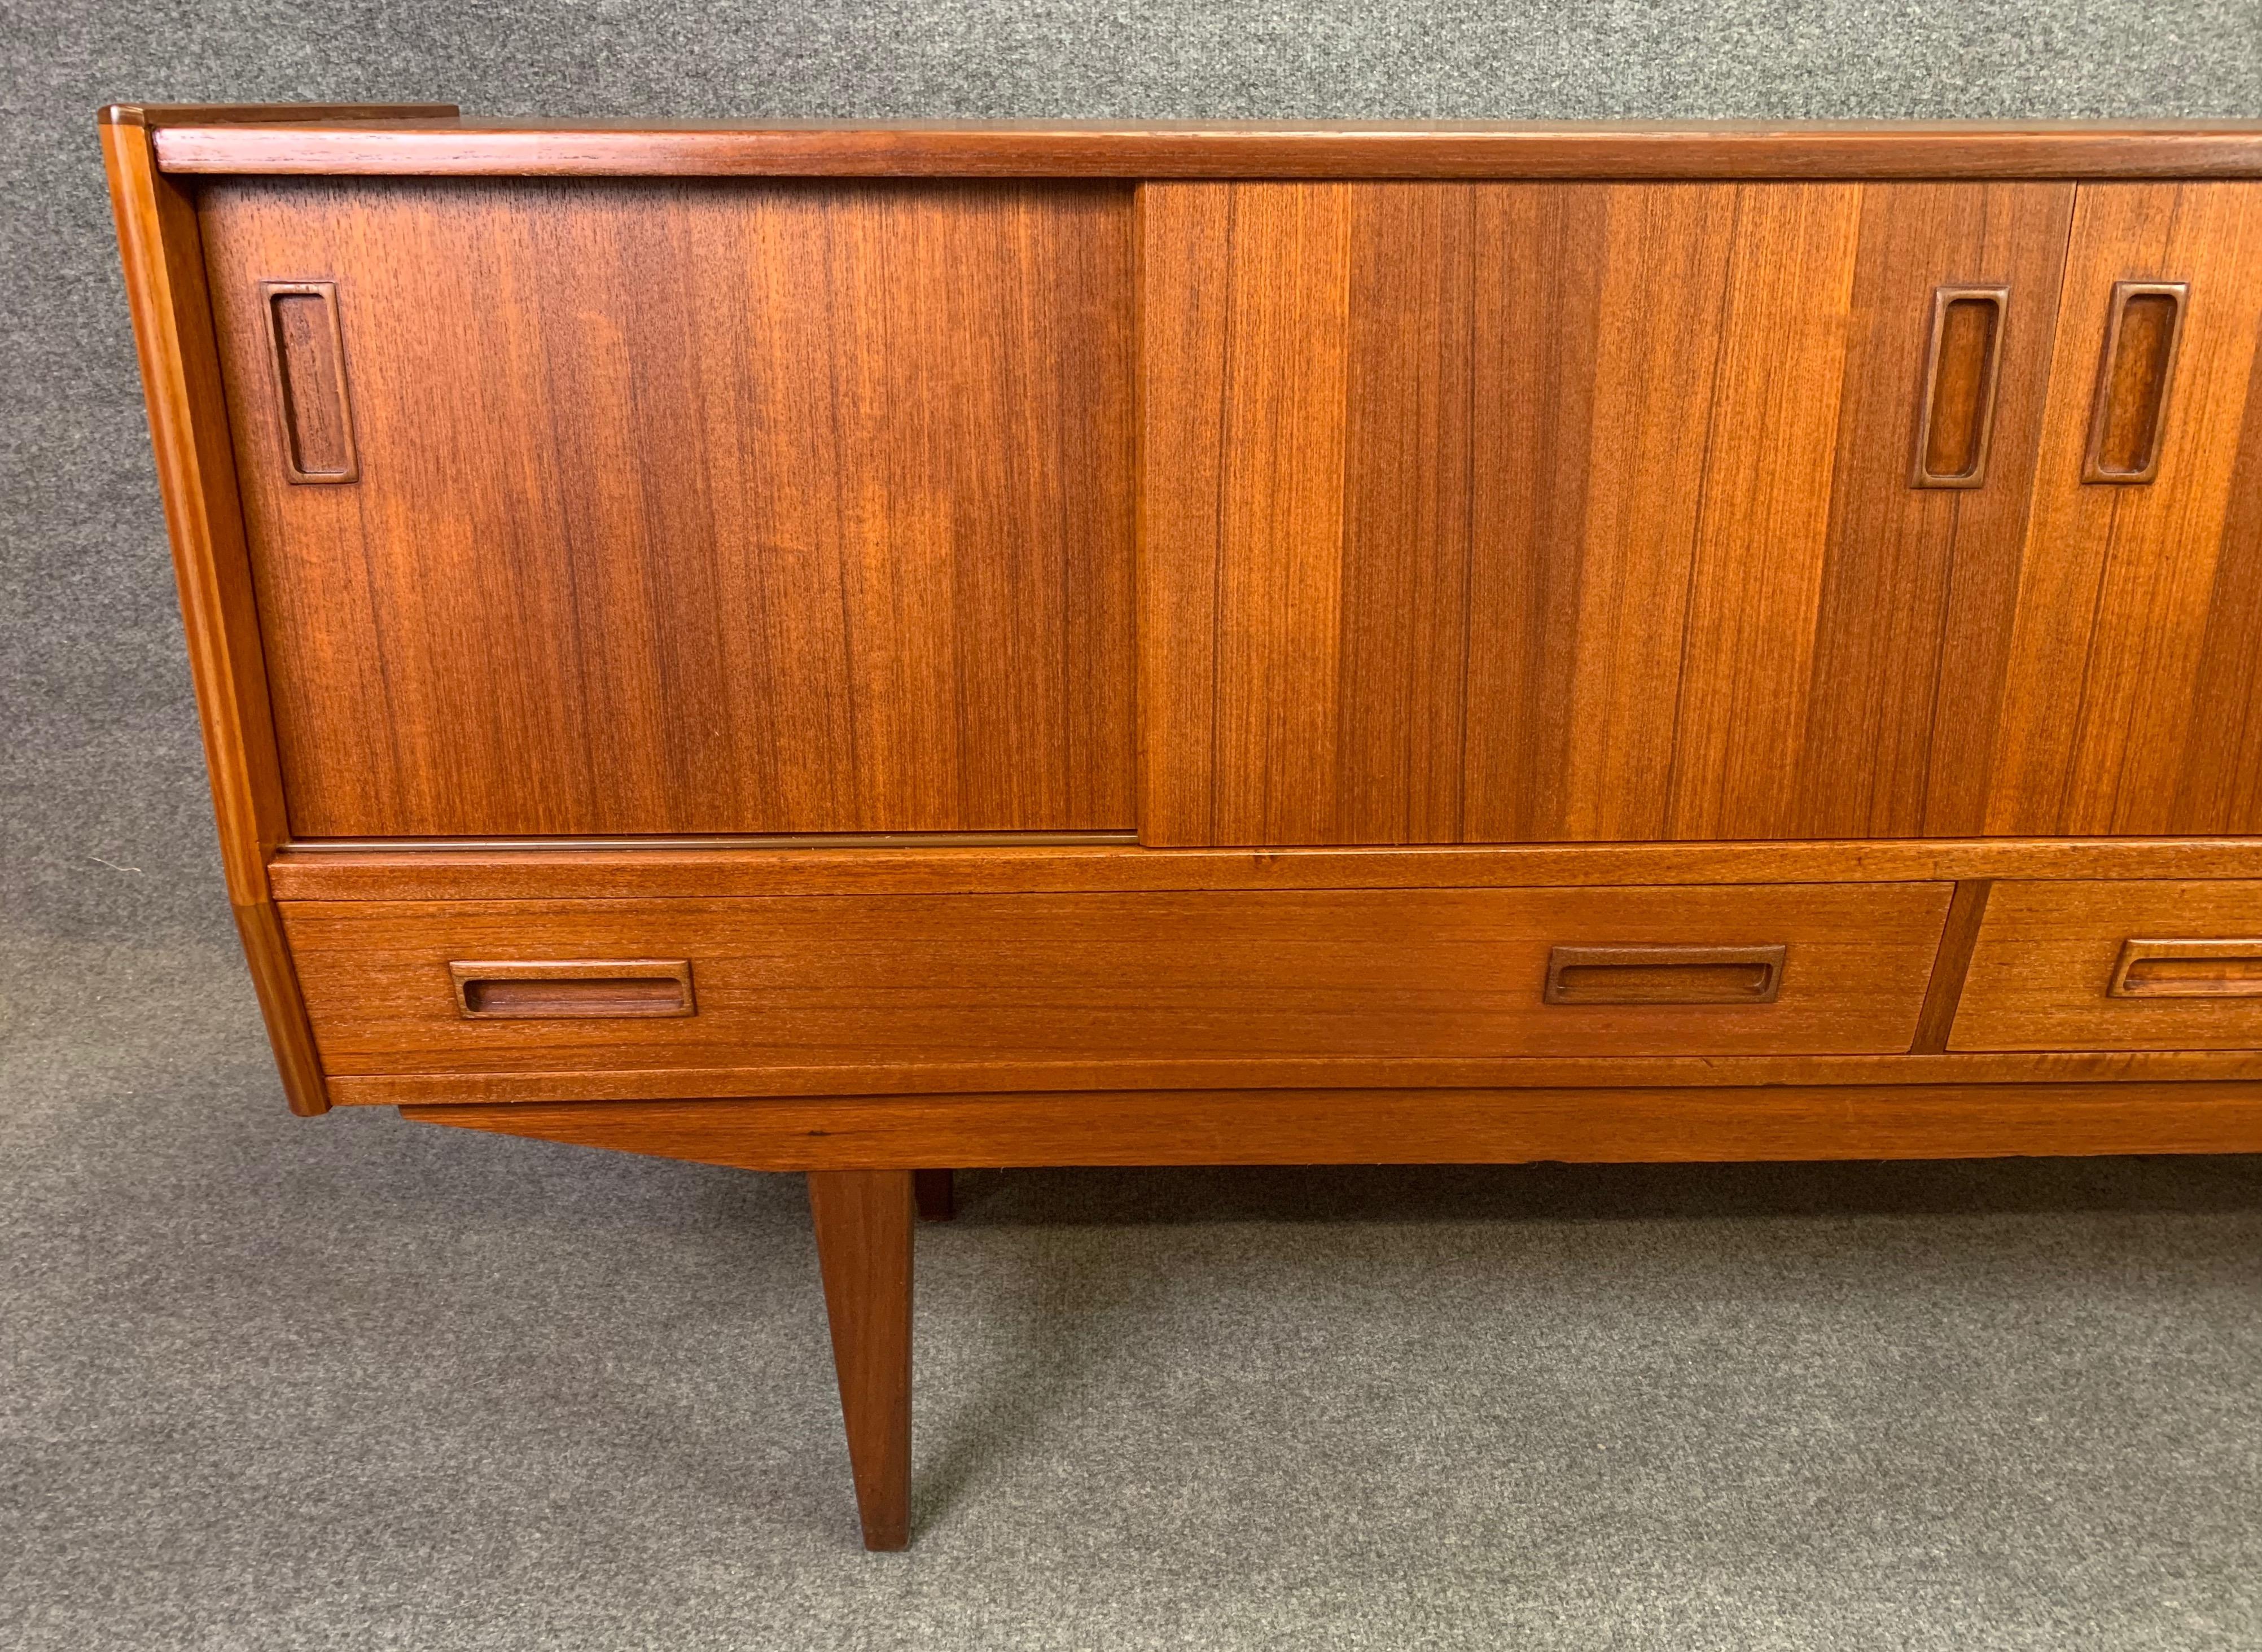 Here is a beautiful 1960s Scandinavian Modern teak sideboard recently imported from Denmark to California before its restoration.
This exquisite credenza features a vibrant wood grain, four sliding doors revealing storage cubbies with adjustable